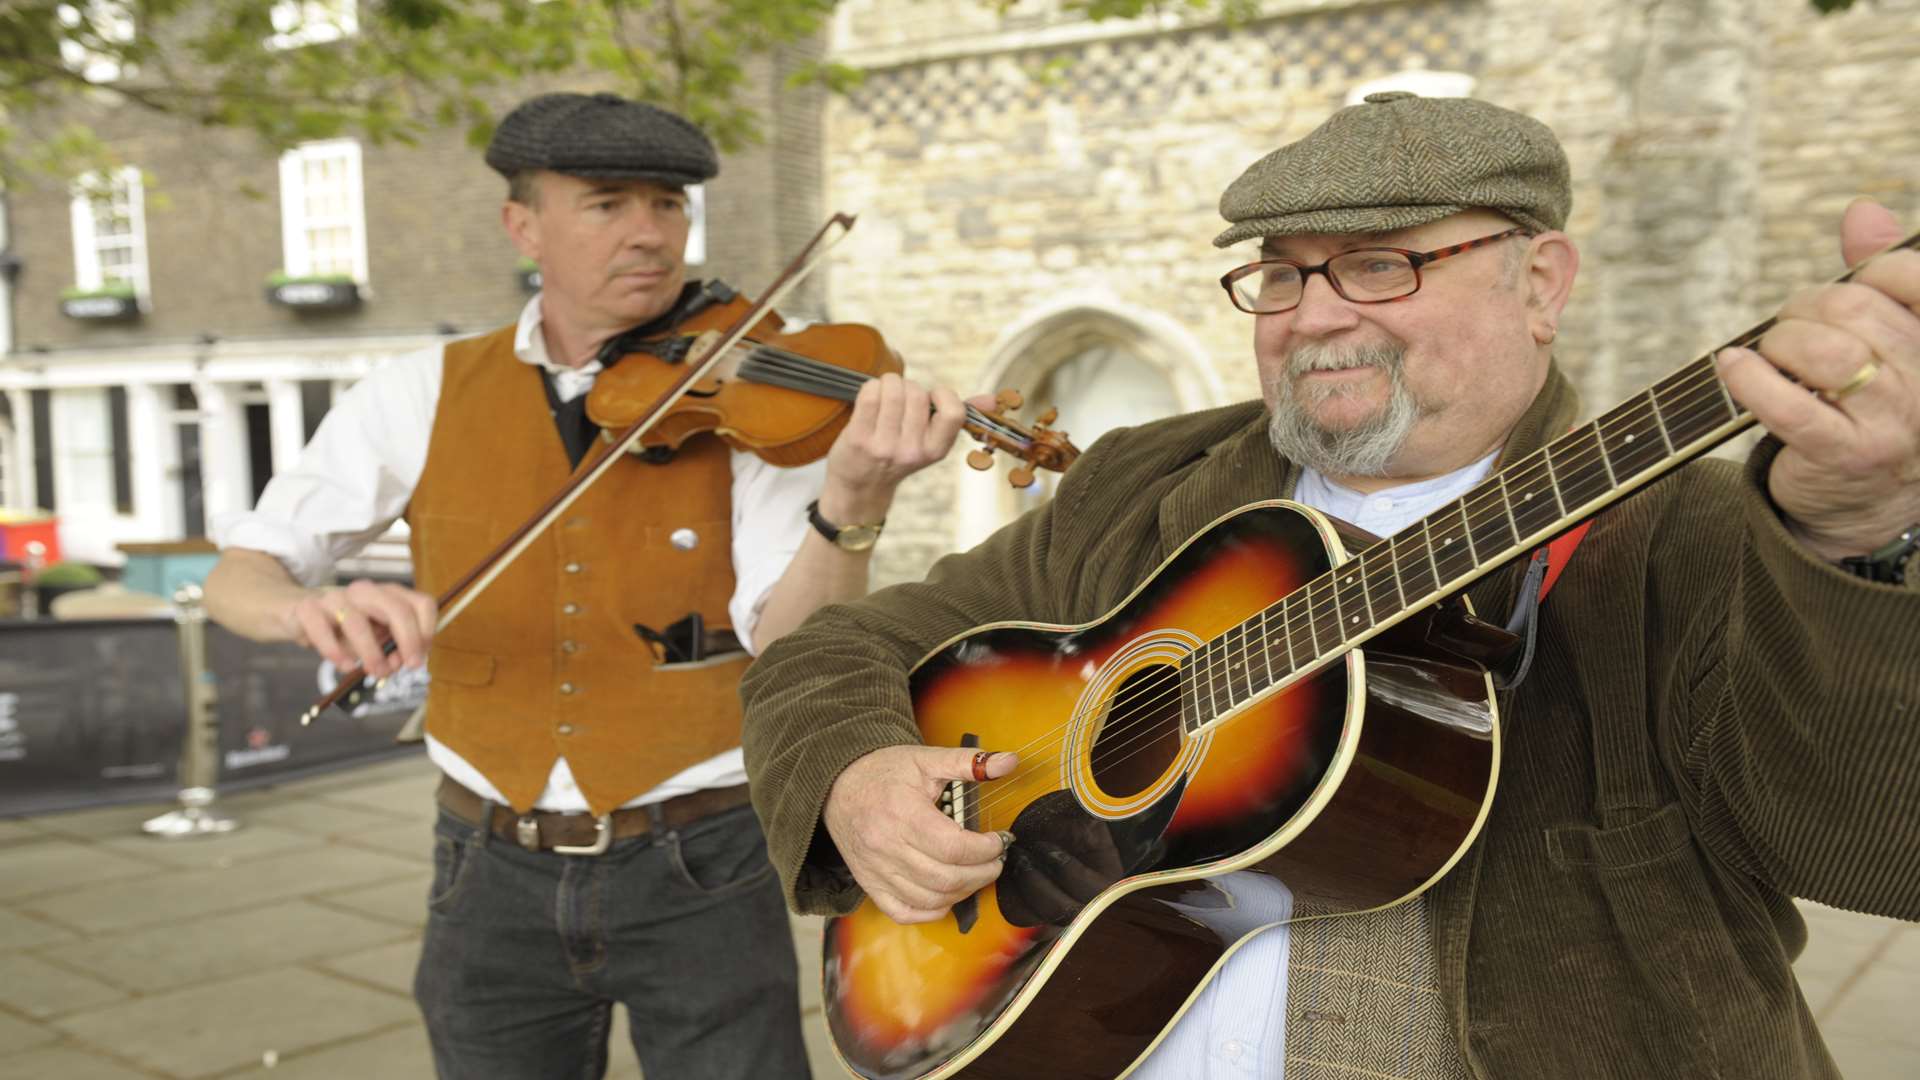 The Grewl Brothers performing at last year's event